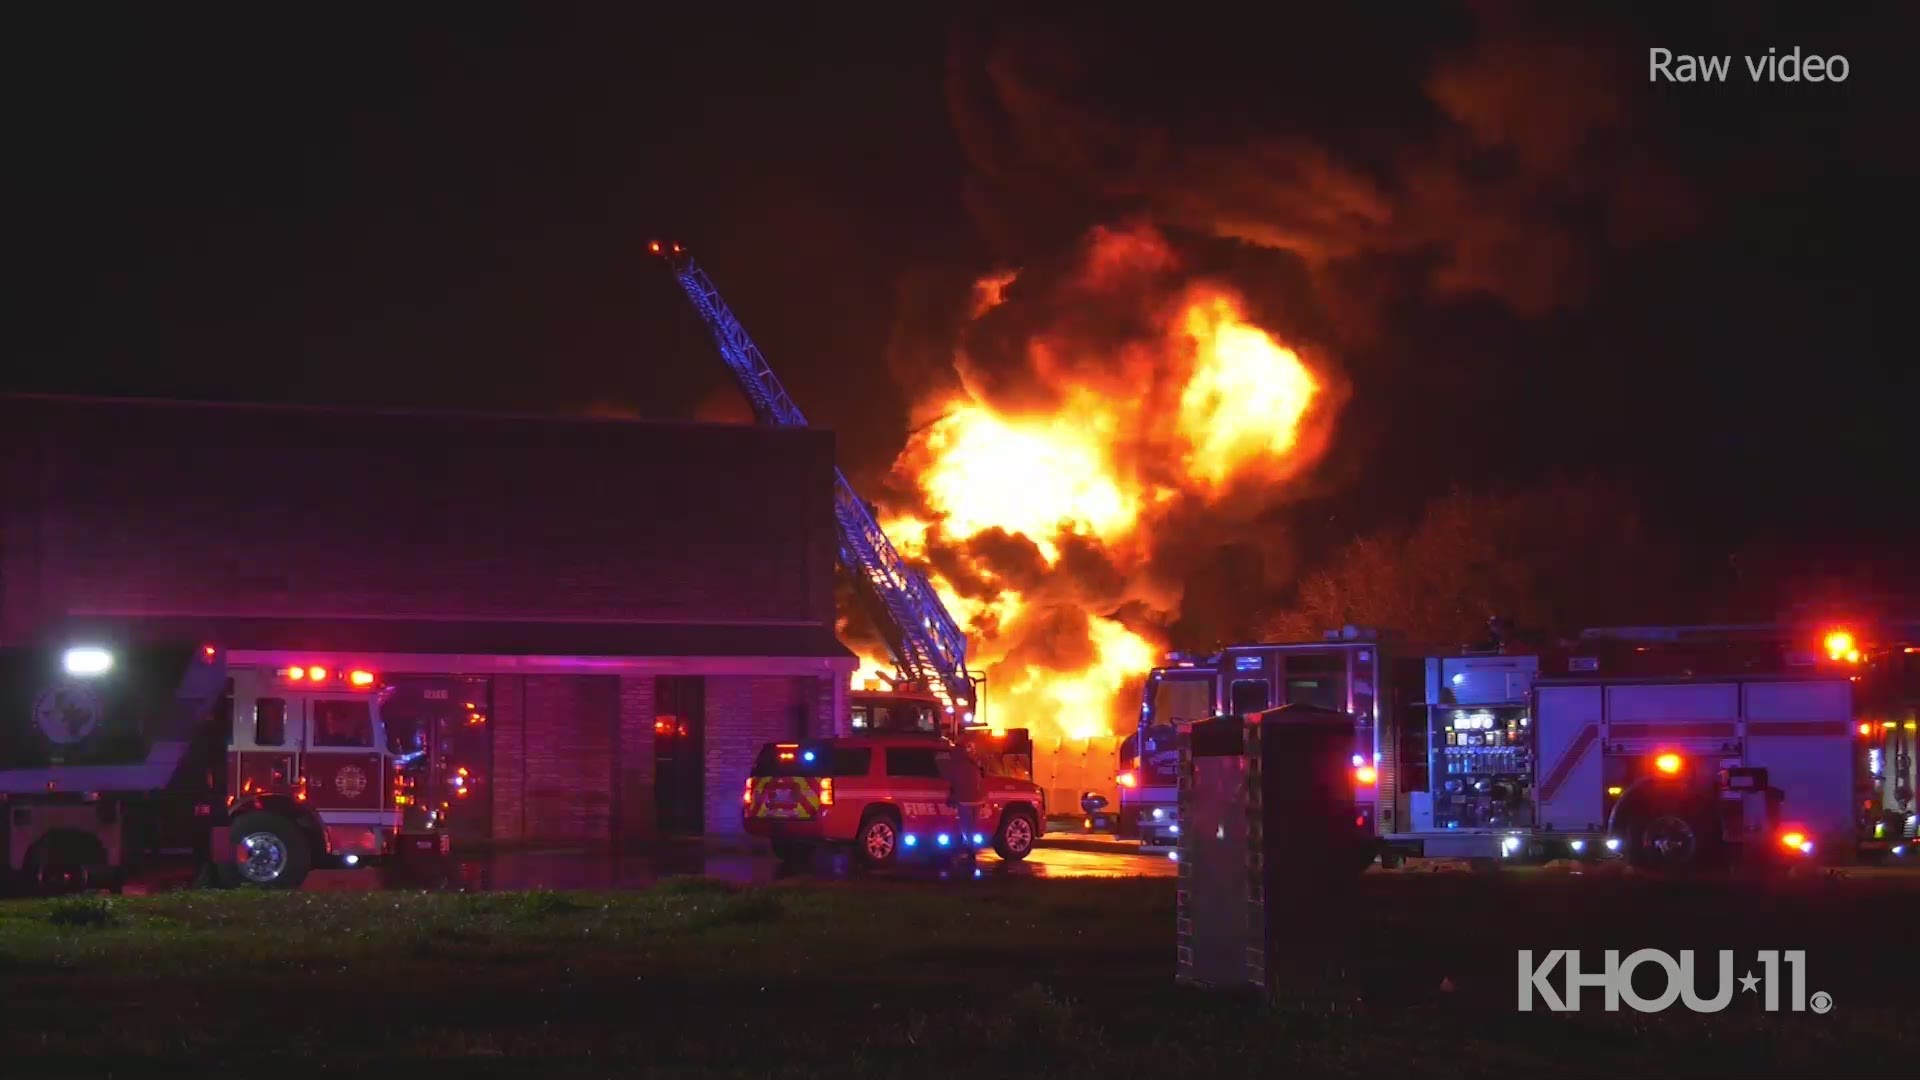 A fire in the 19700 block of Aldine sent a large column of flames and smoke into the skies north of Houston late Wednesday.